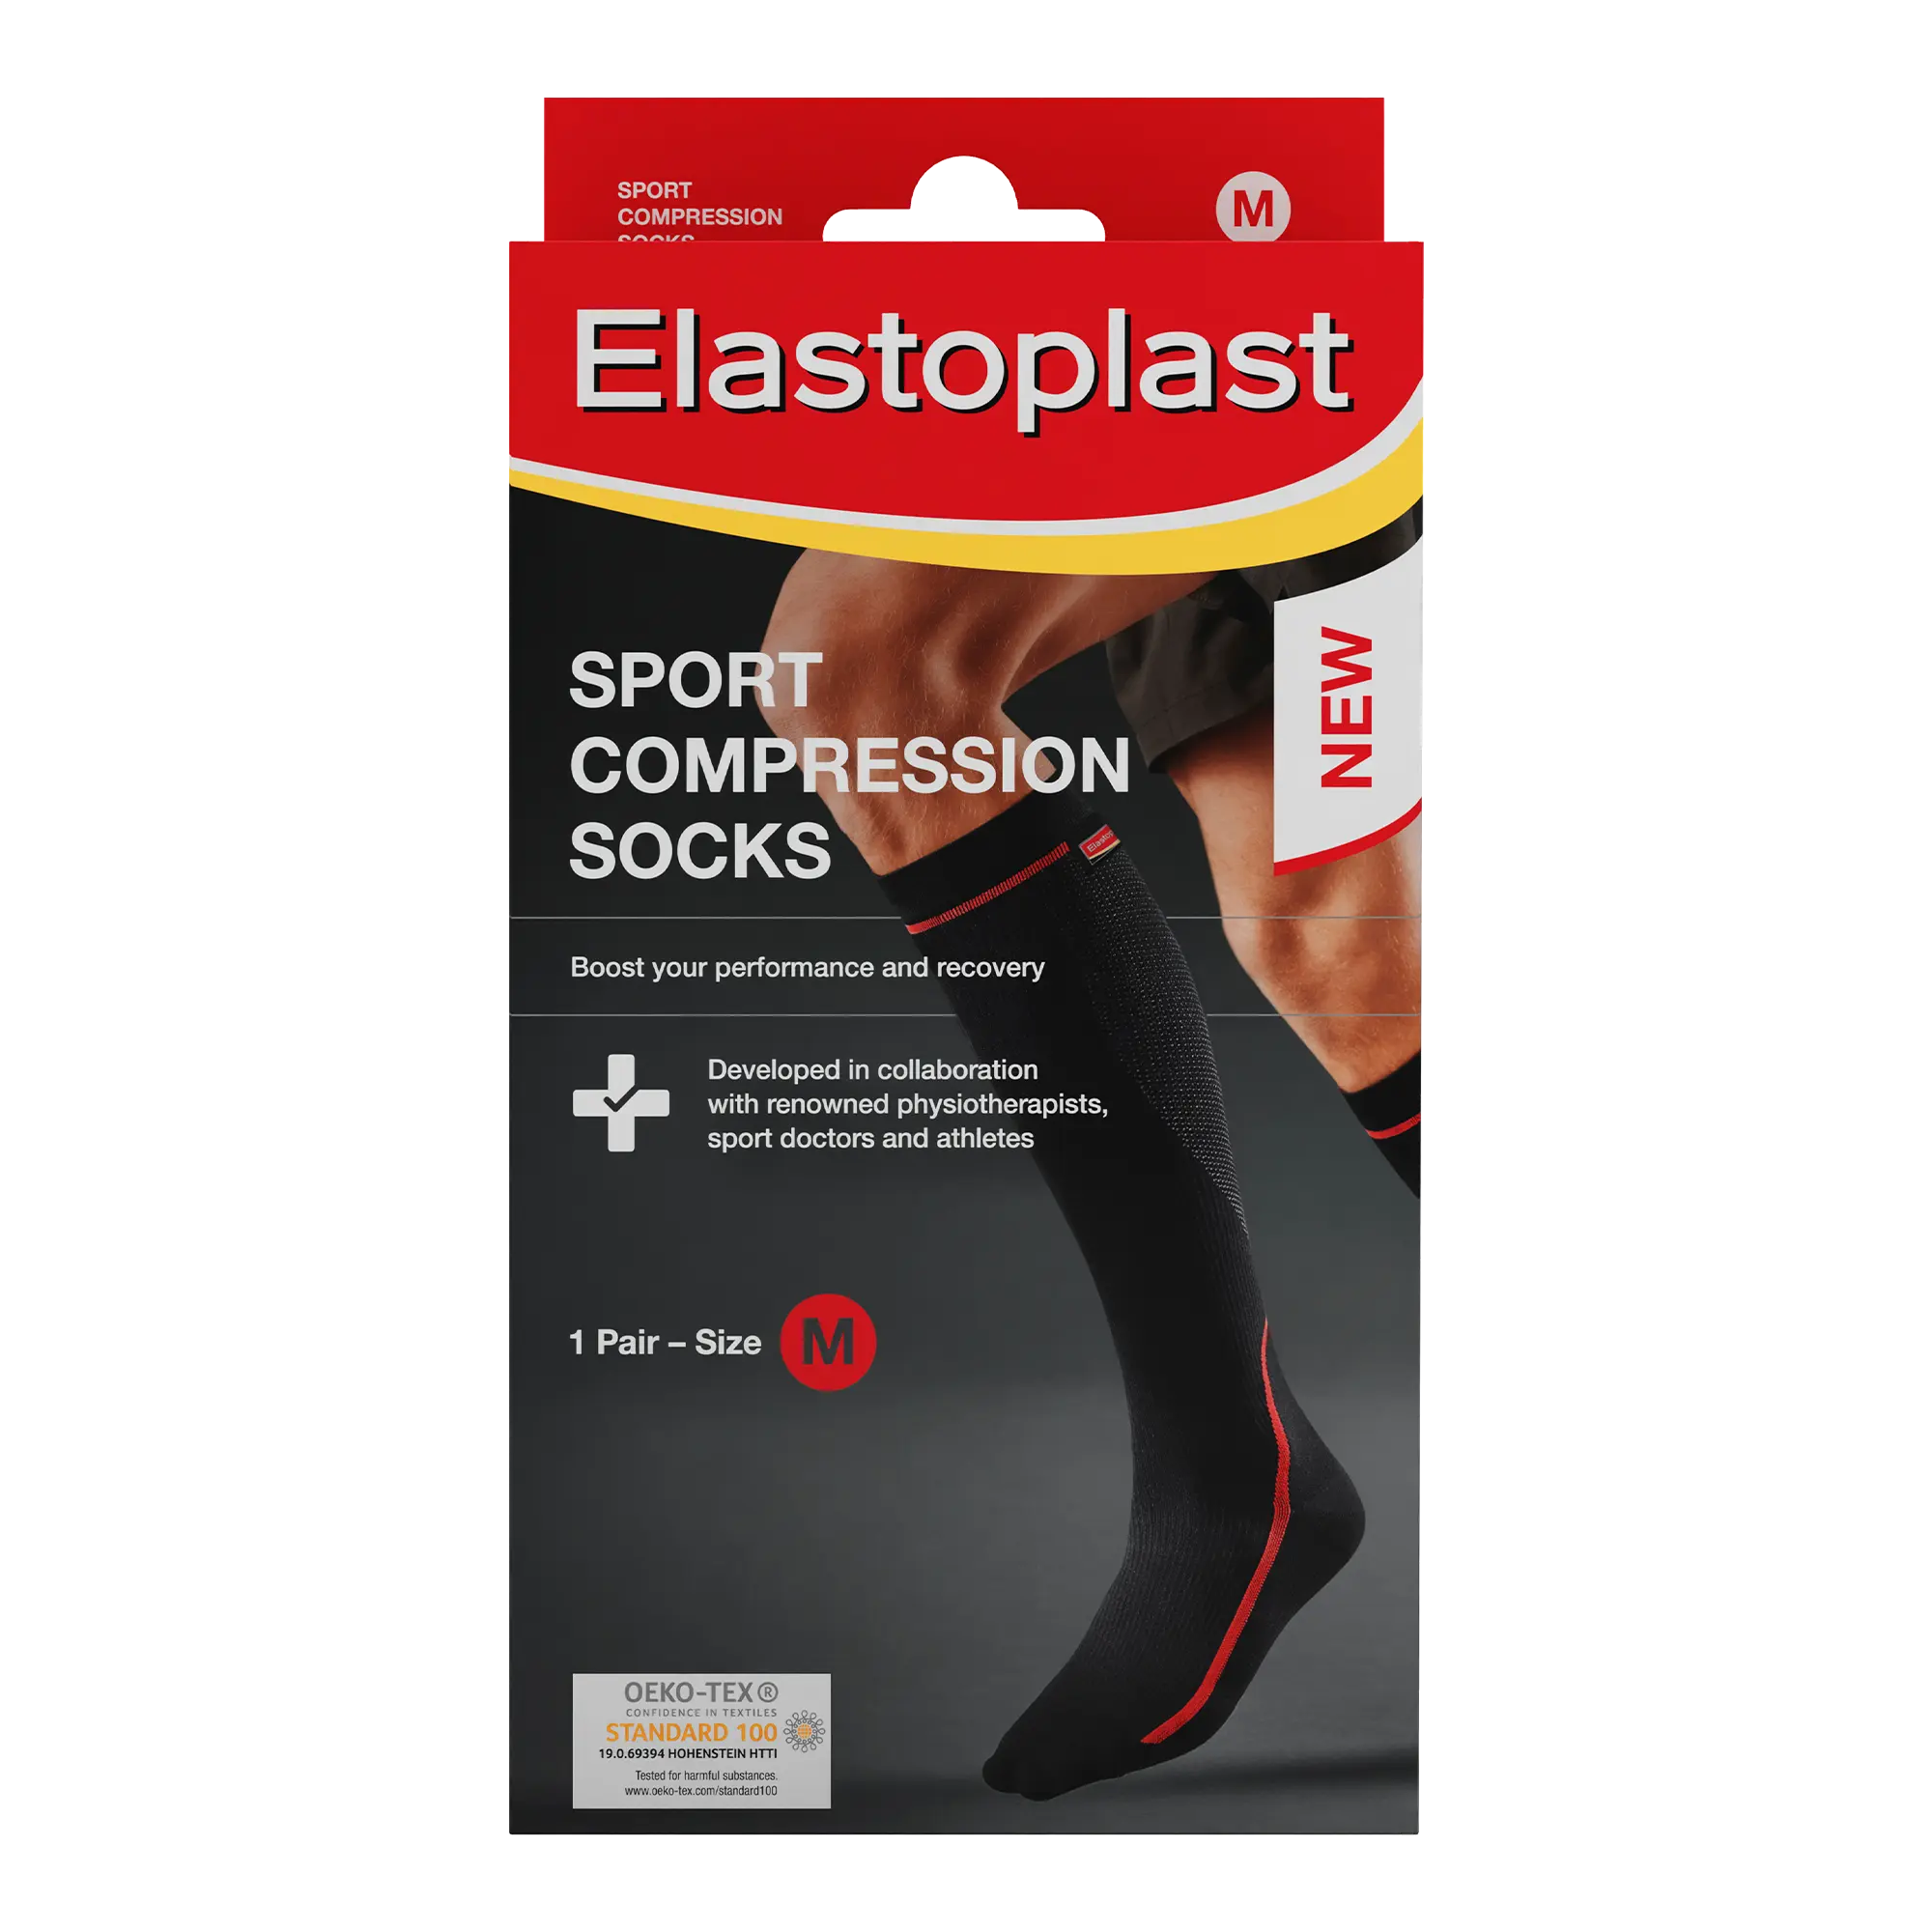 Hansaplast Wrap Around Ankle Support Bandage - Firm Support for Ankles